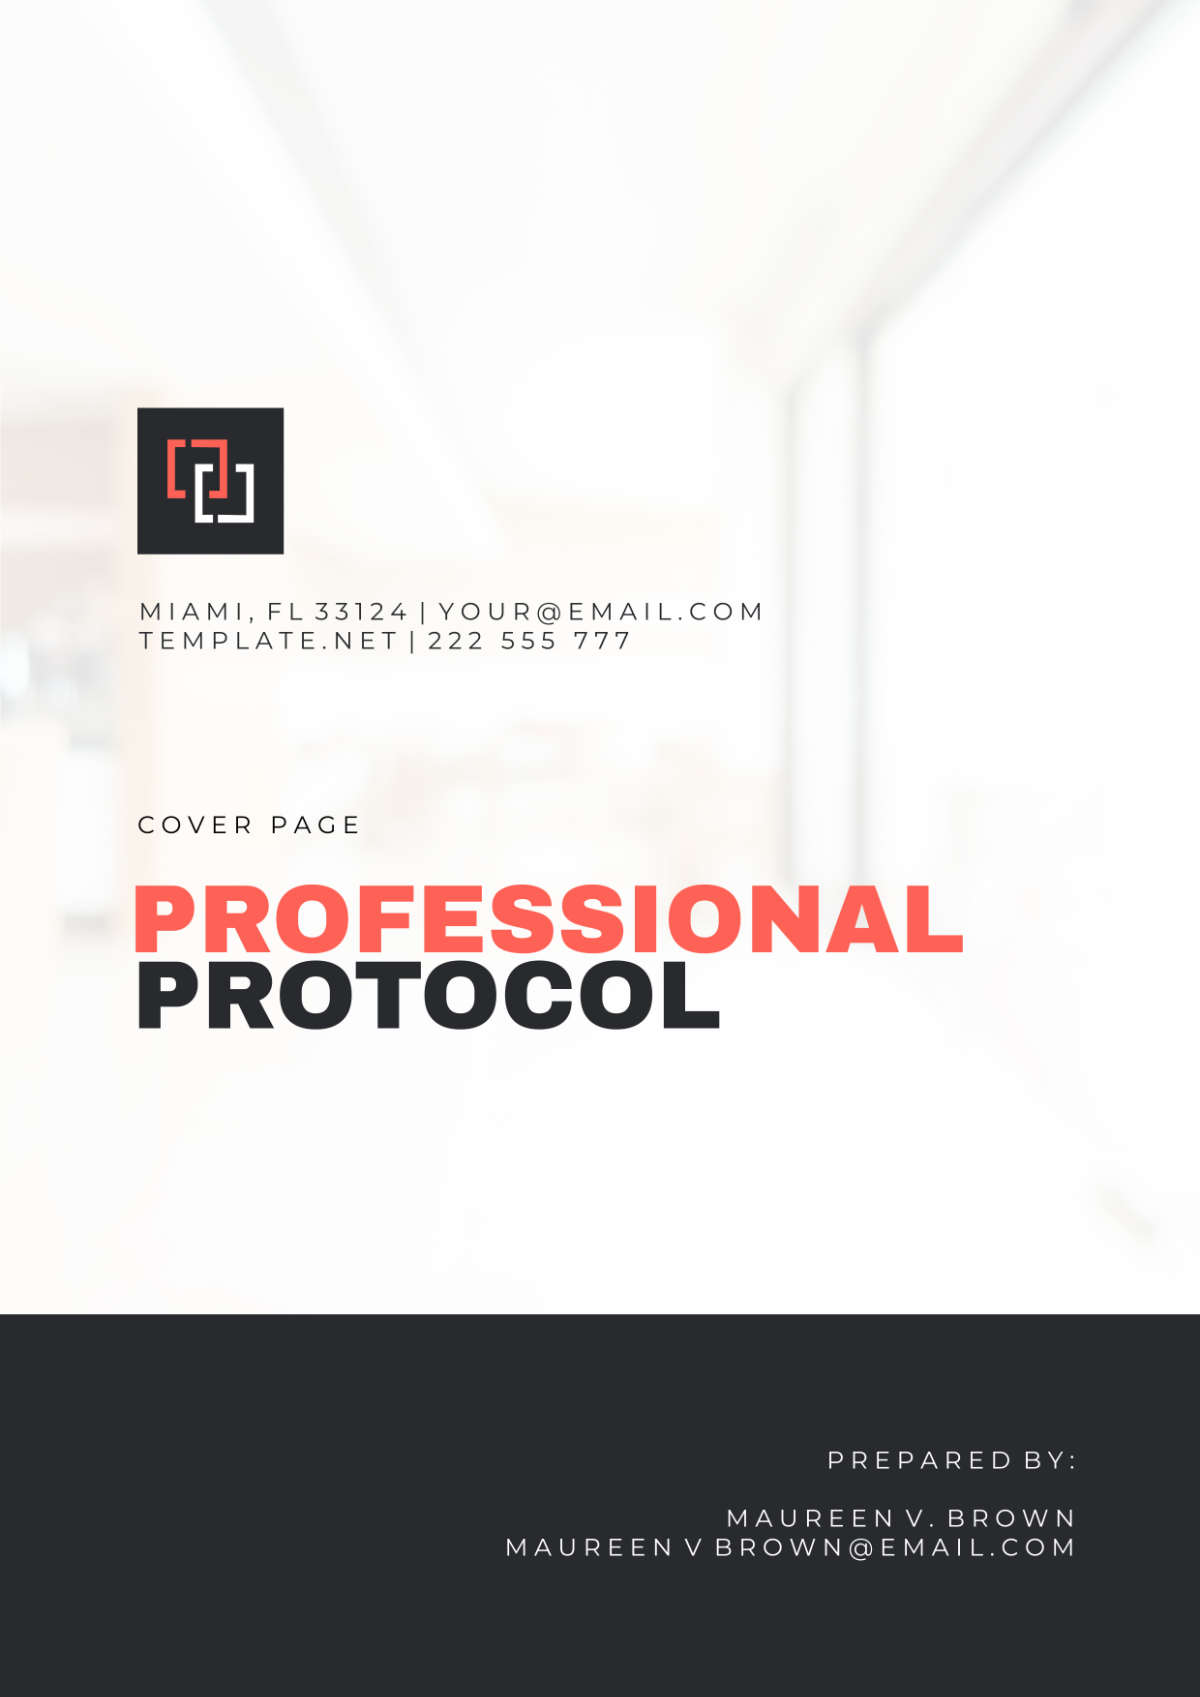 Professional Protocol Cover Page